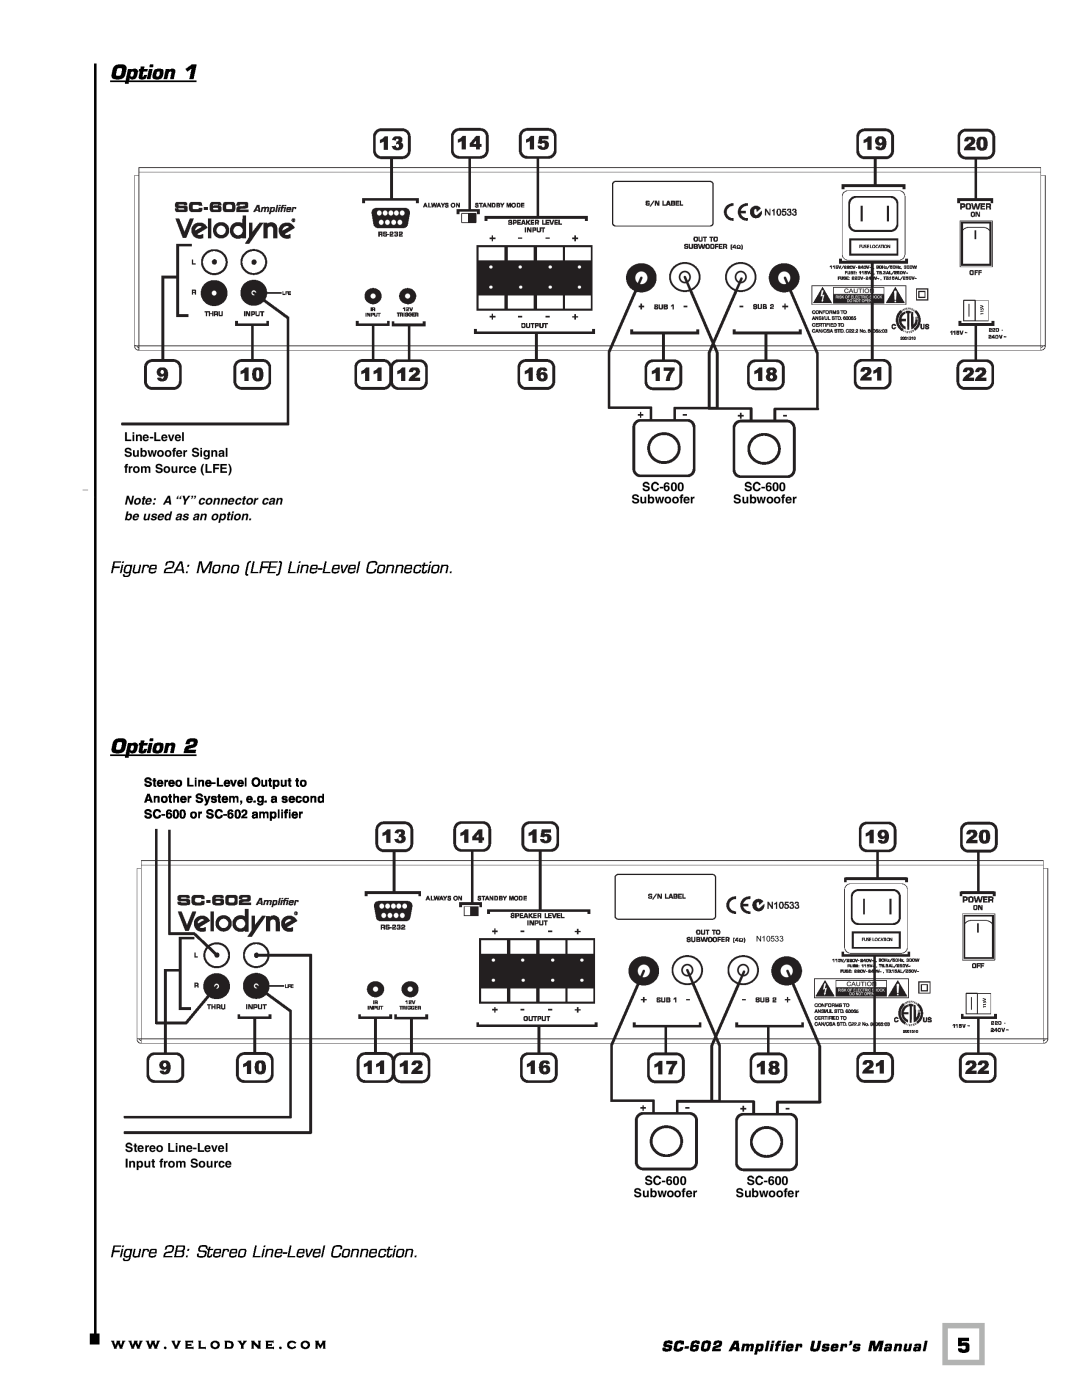 Velodyne Acoustics SC-602 user manual Option, A Mono LFE Line-LevelConnection, B Stereo Line-LevelConnection 